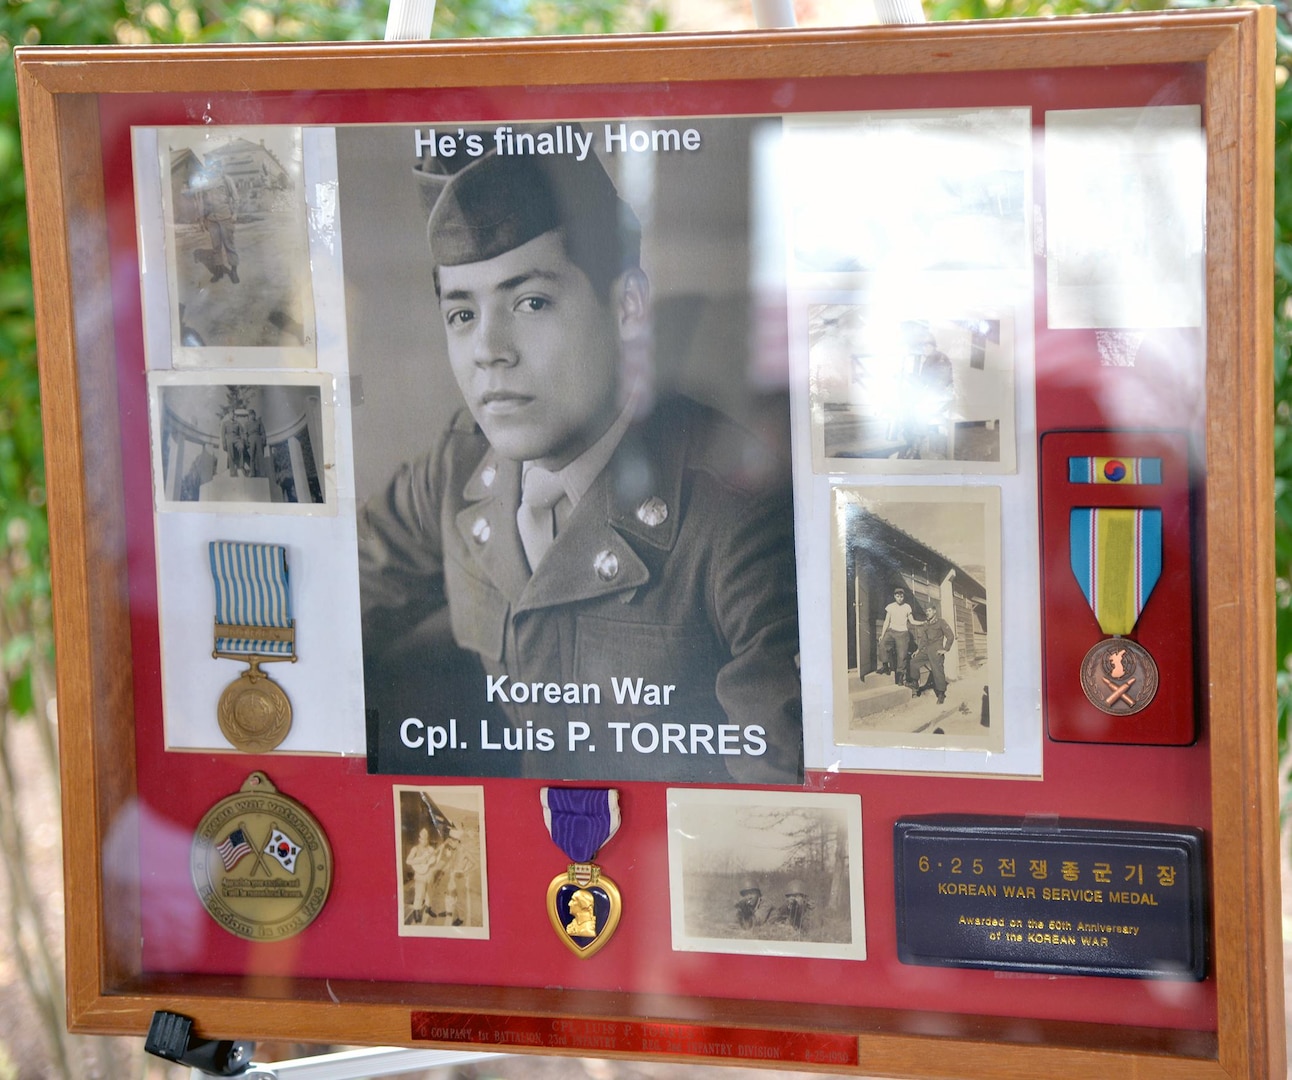 A shadow box displays some photos and medals awarded to Cpl. Luis Patlan Torres, who was interred at Fort Sam Houston National Cemetery Jan. 13 after being missing in action since 1950.